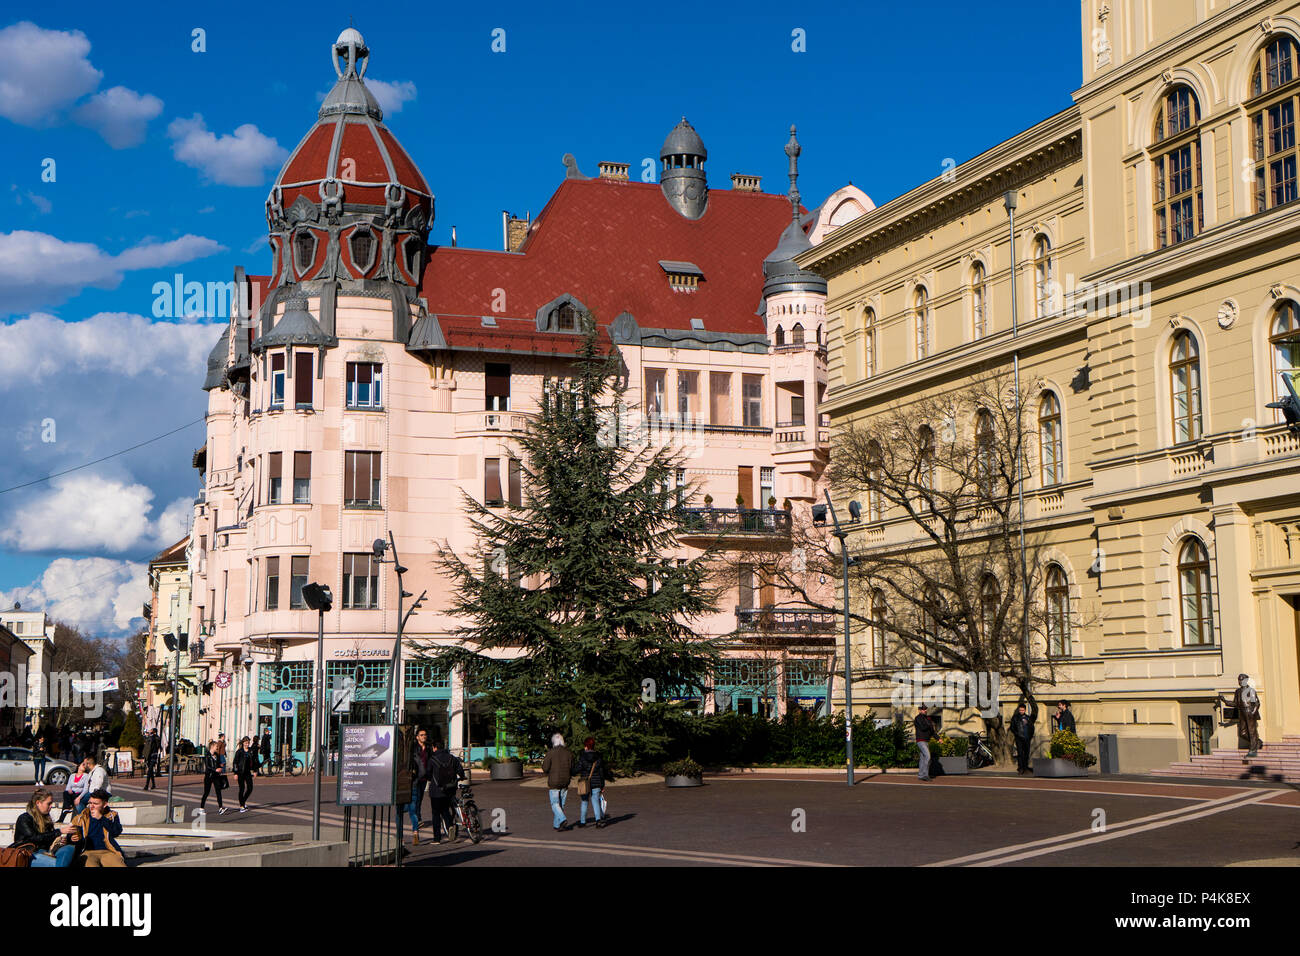 Szeged, Hungary - March 13, 2018: Dugonics square in the center of Szeged Stock Photo